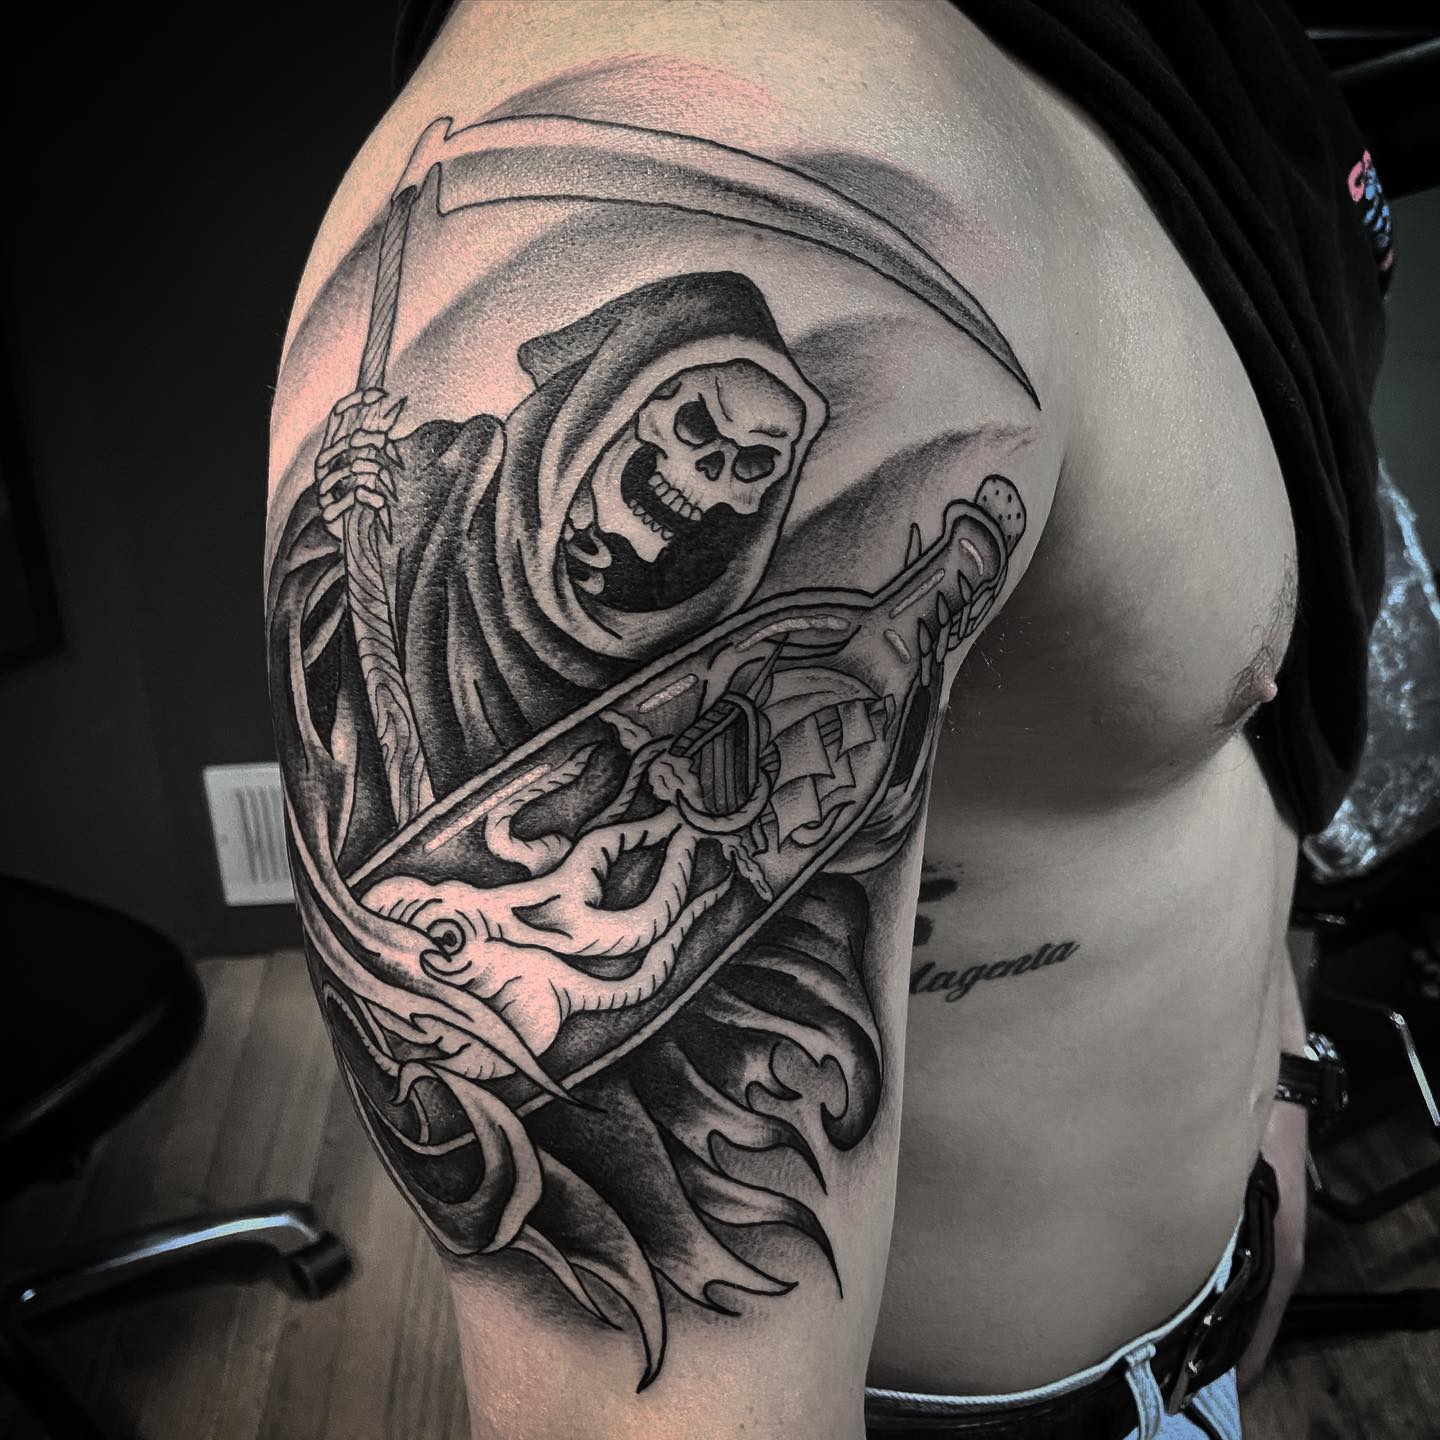 Ship and Ghost Tattoo